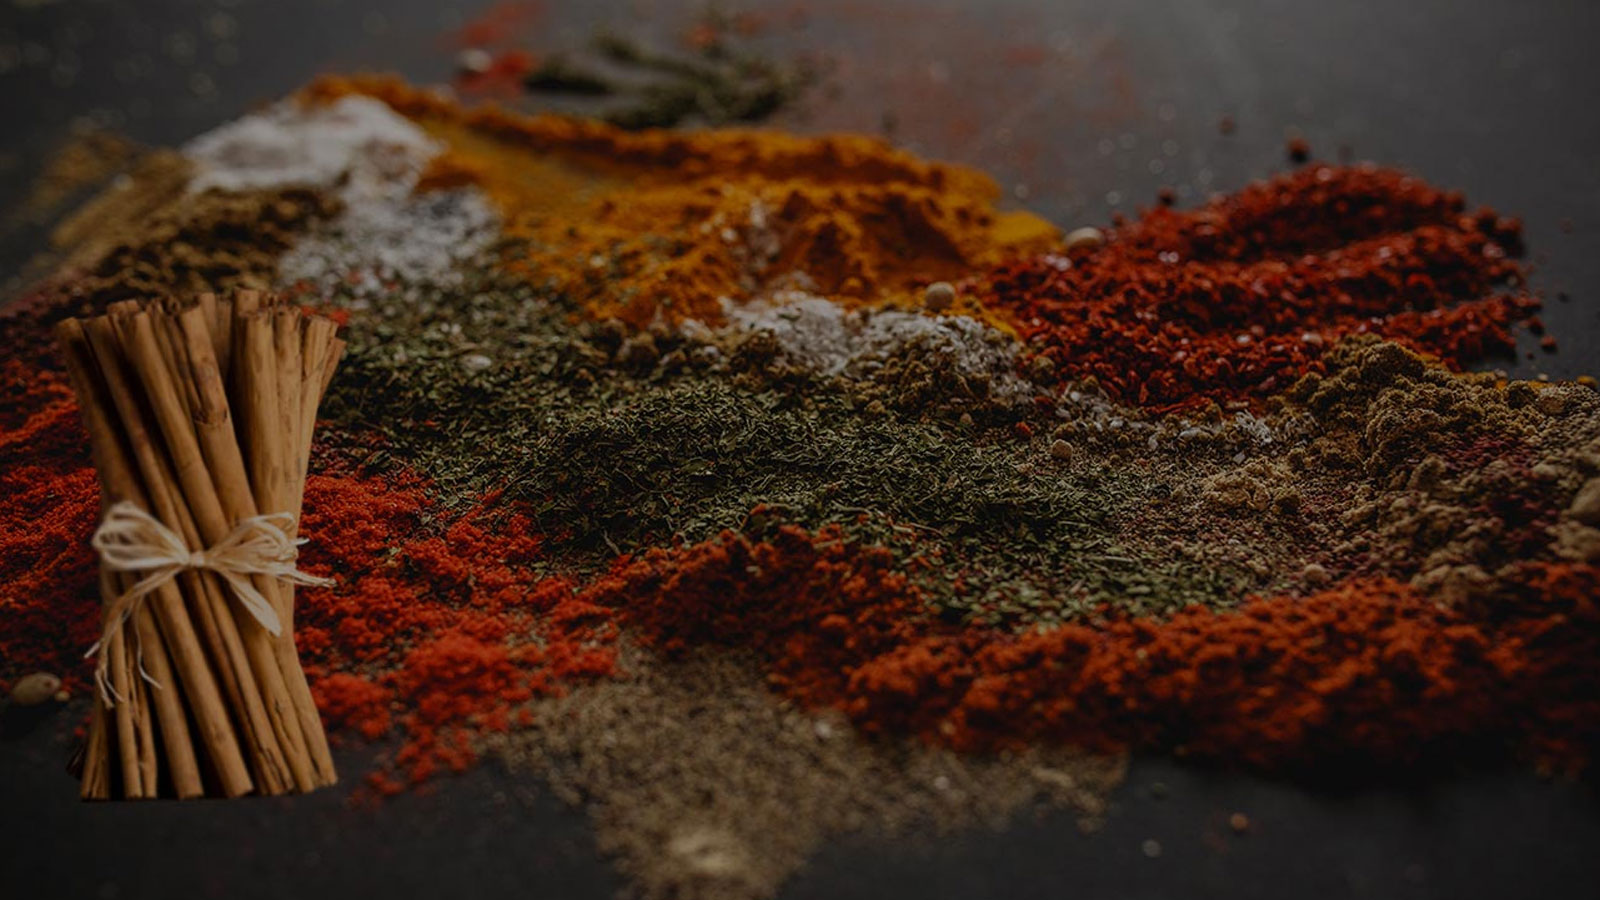 BUGHARY BIO SPICES